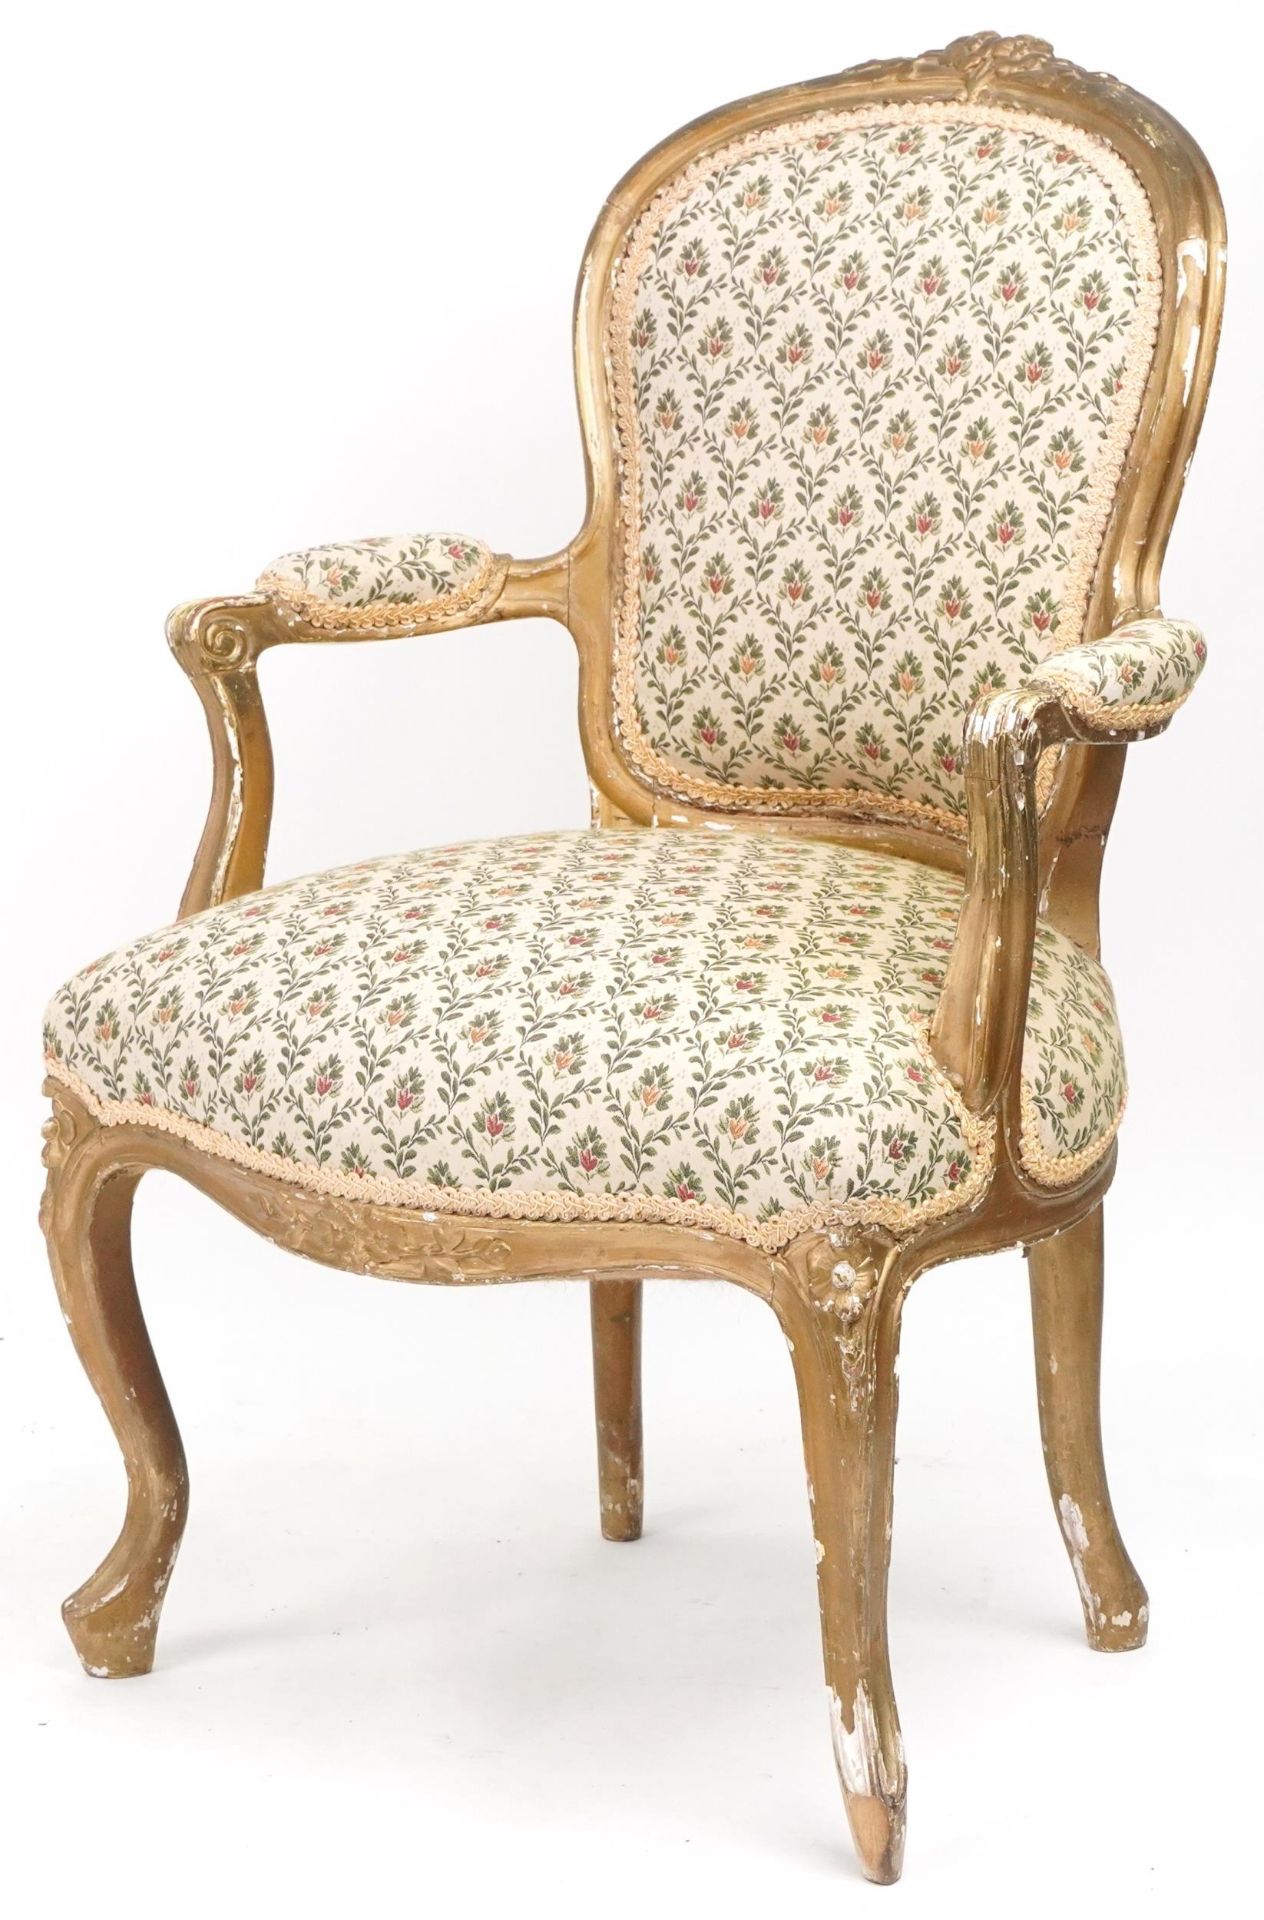 French gilt framed elbow chair with floral upholstery, 99cm high